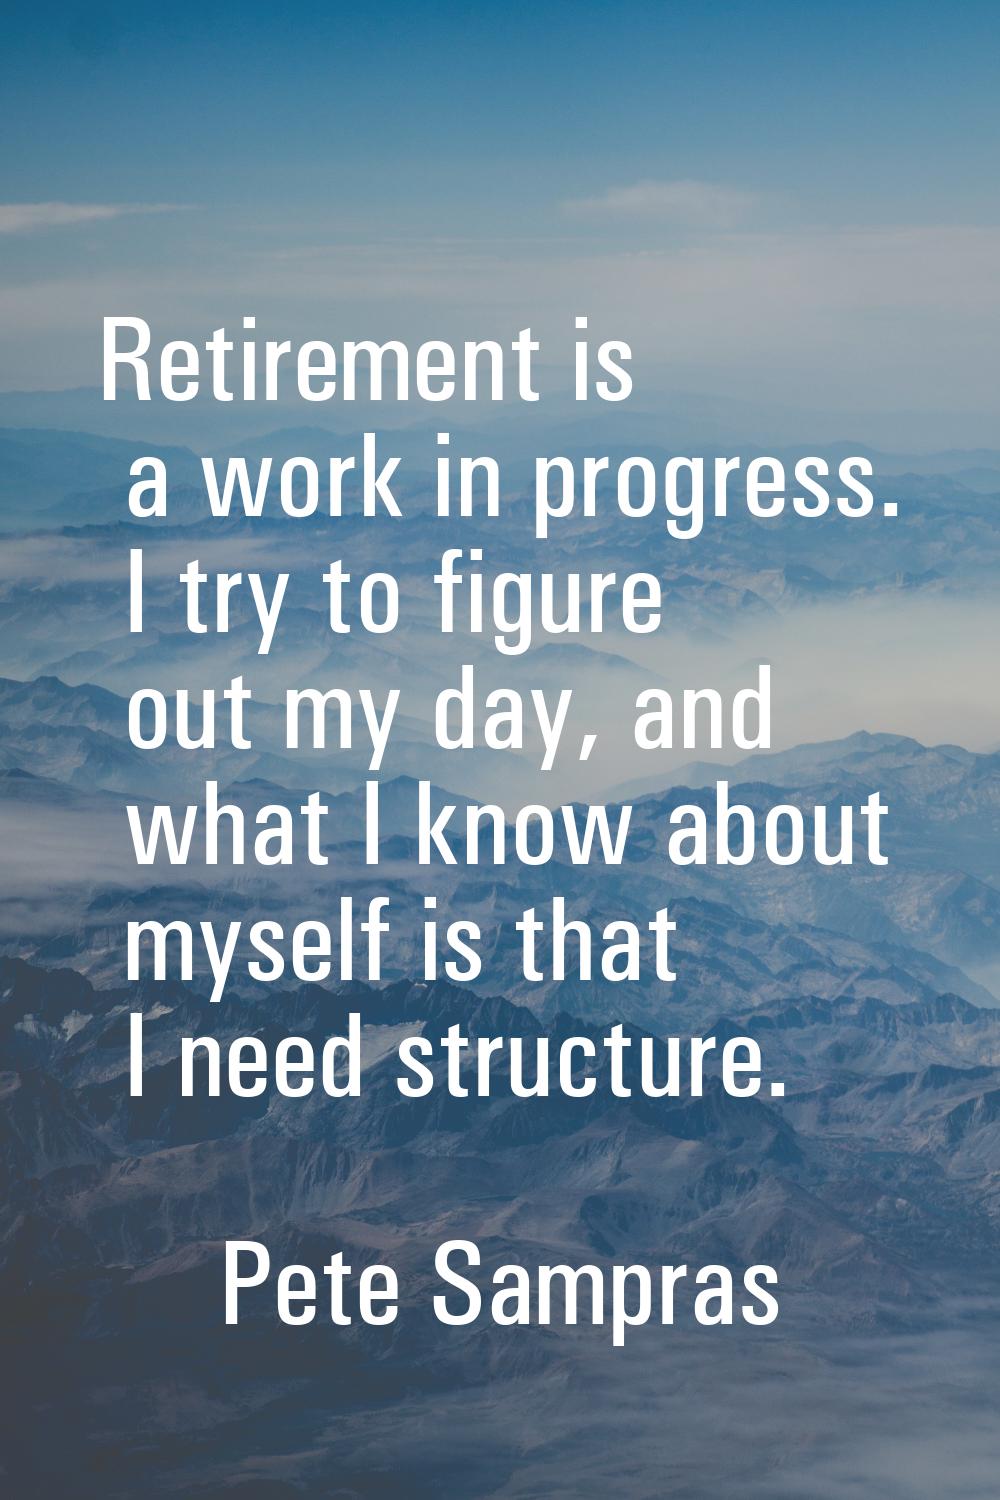 Retirement is a work in progress. I try to figure out my day, and what I know about myself is that 